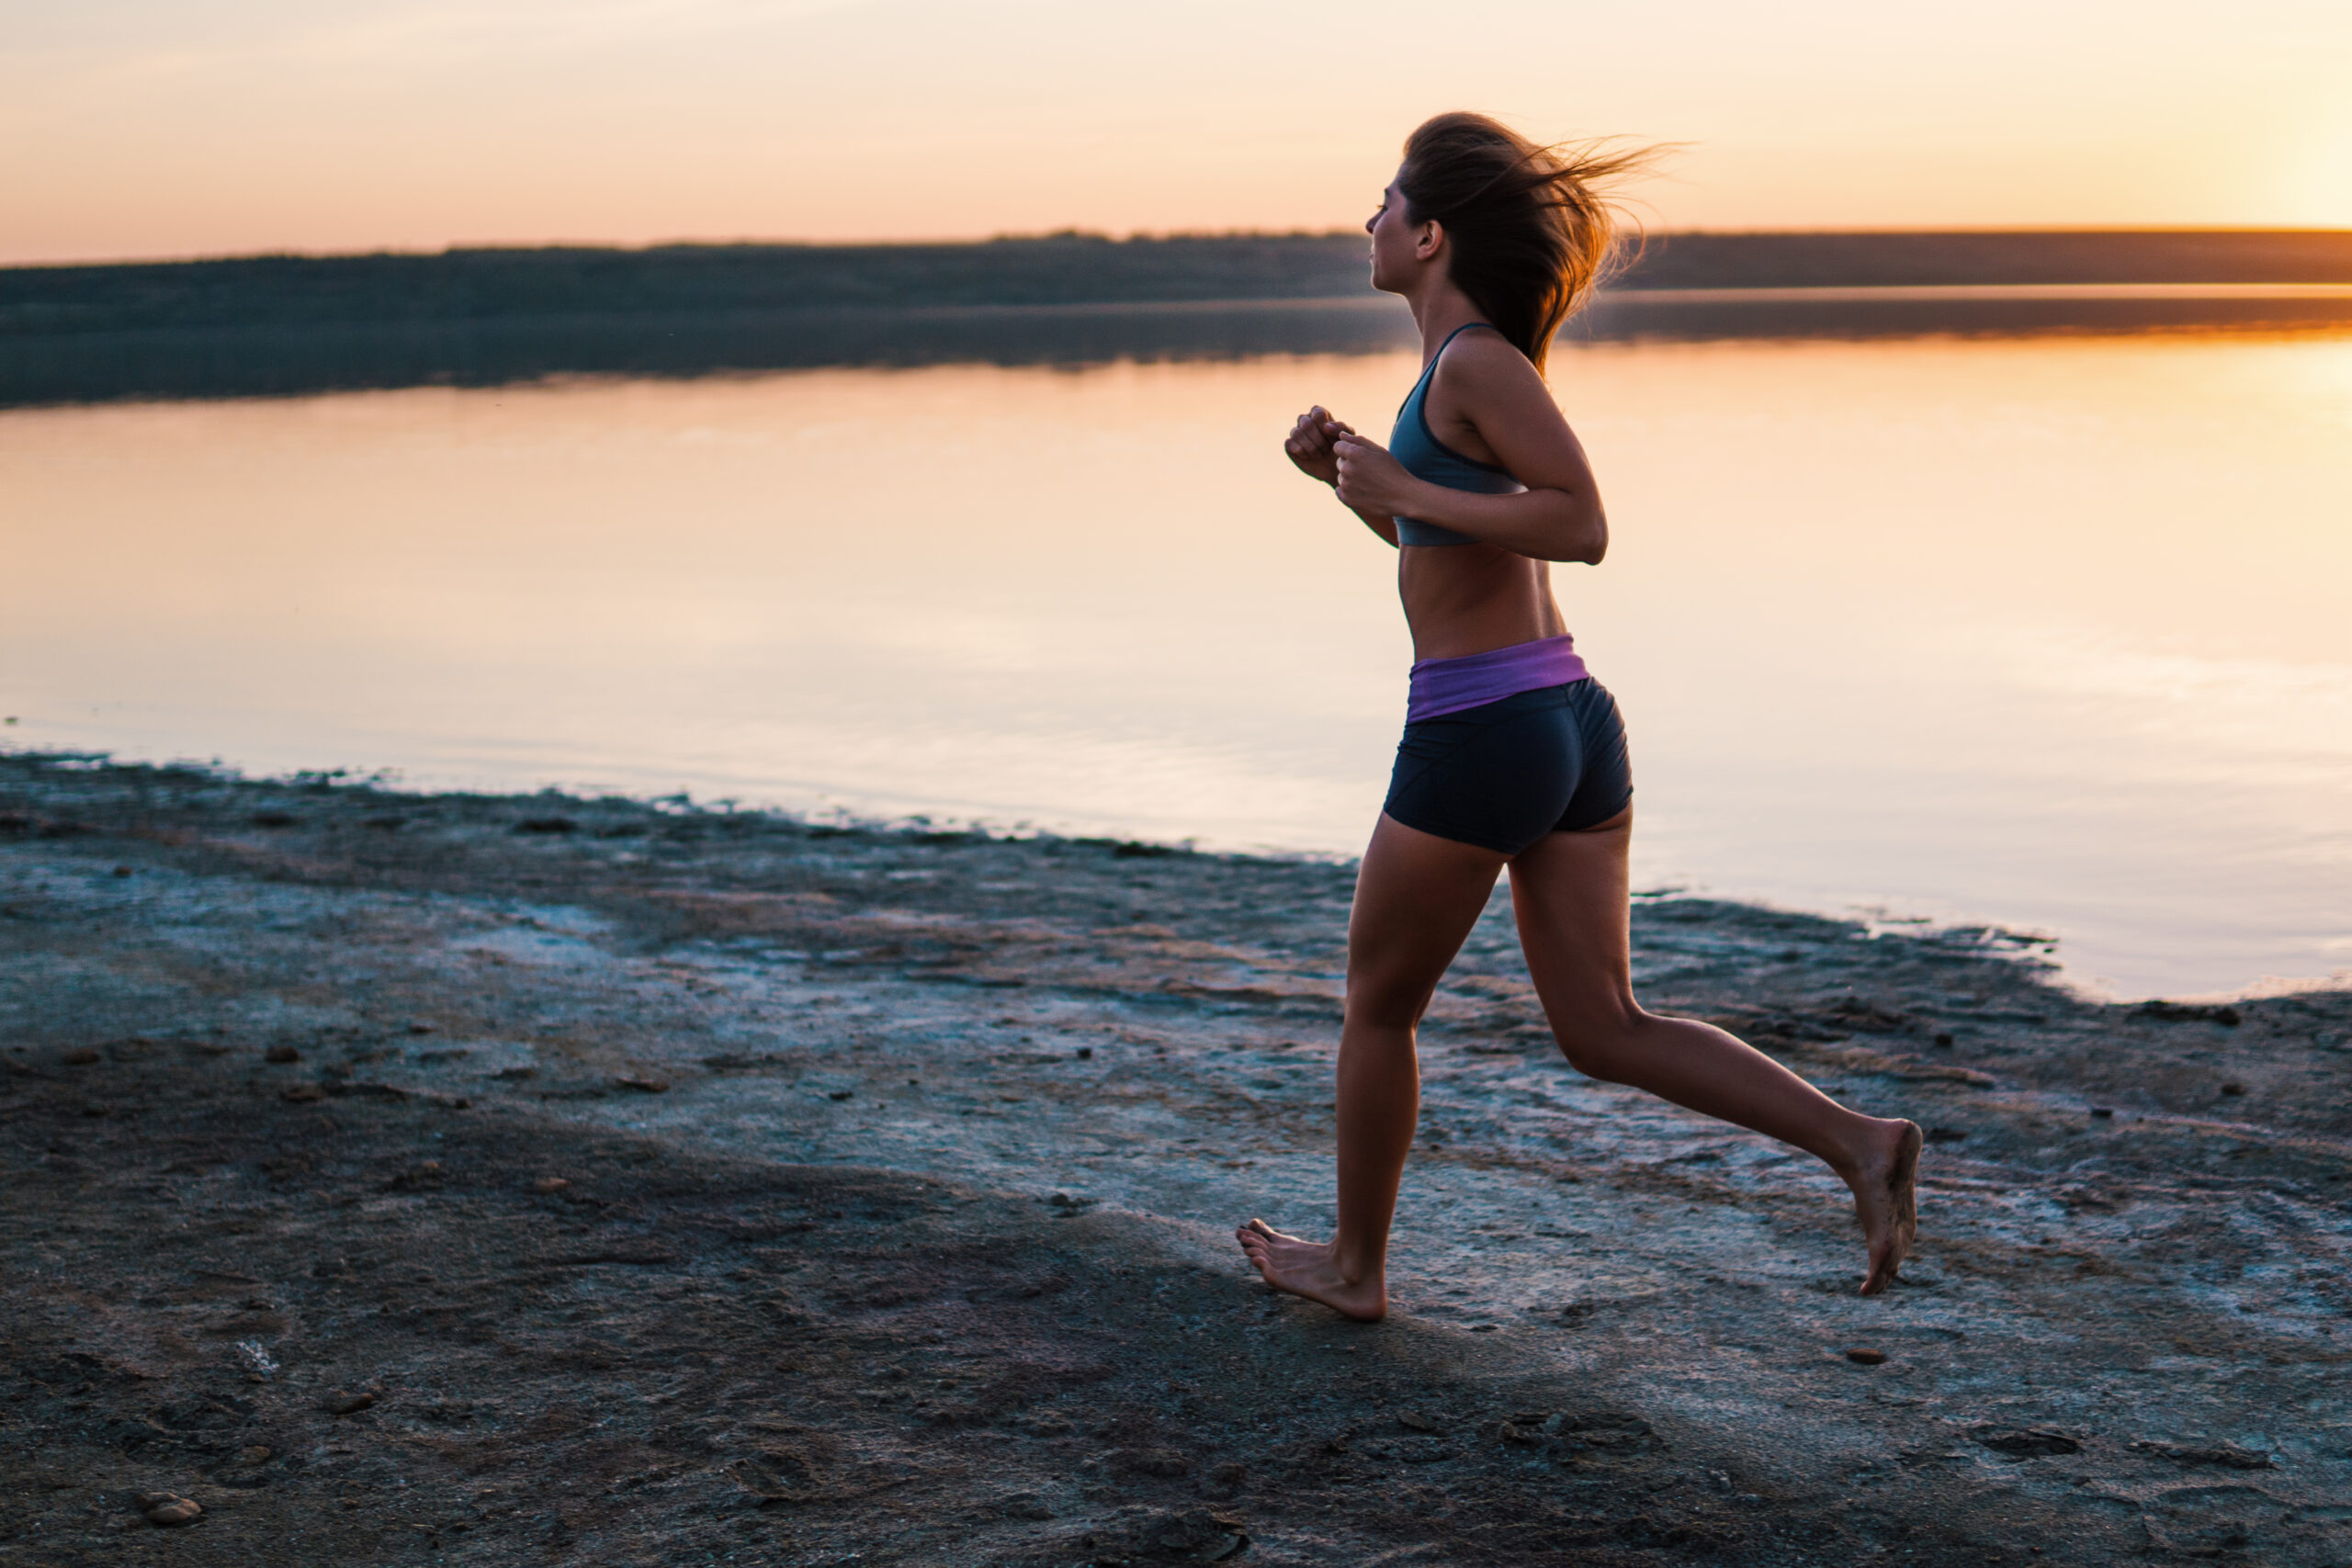 A woman is combining her vacation with running a race near a lake at sunset.